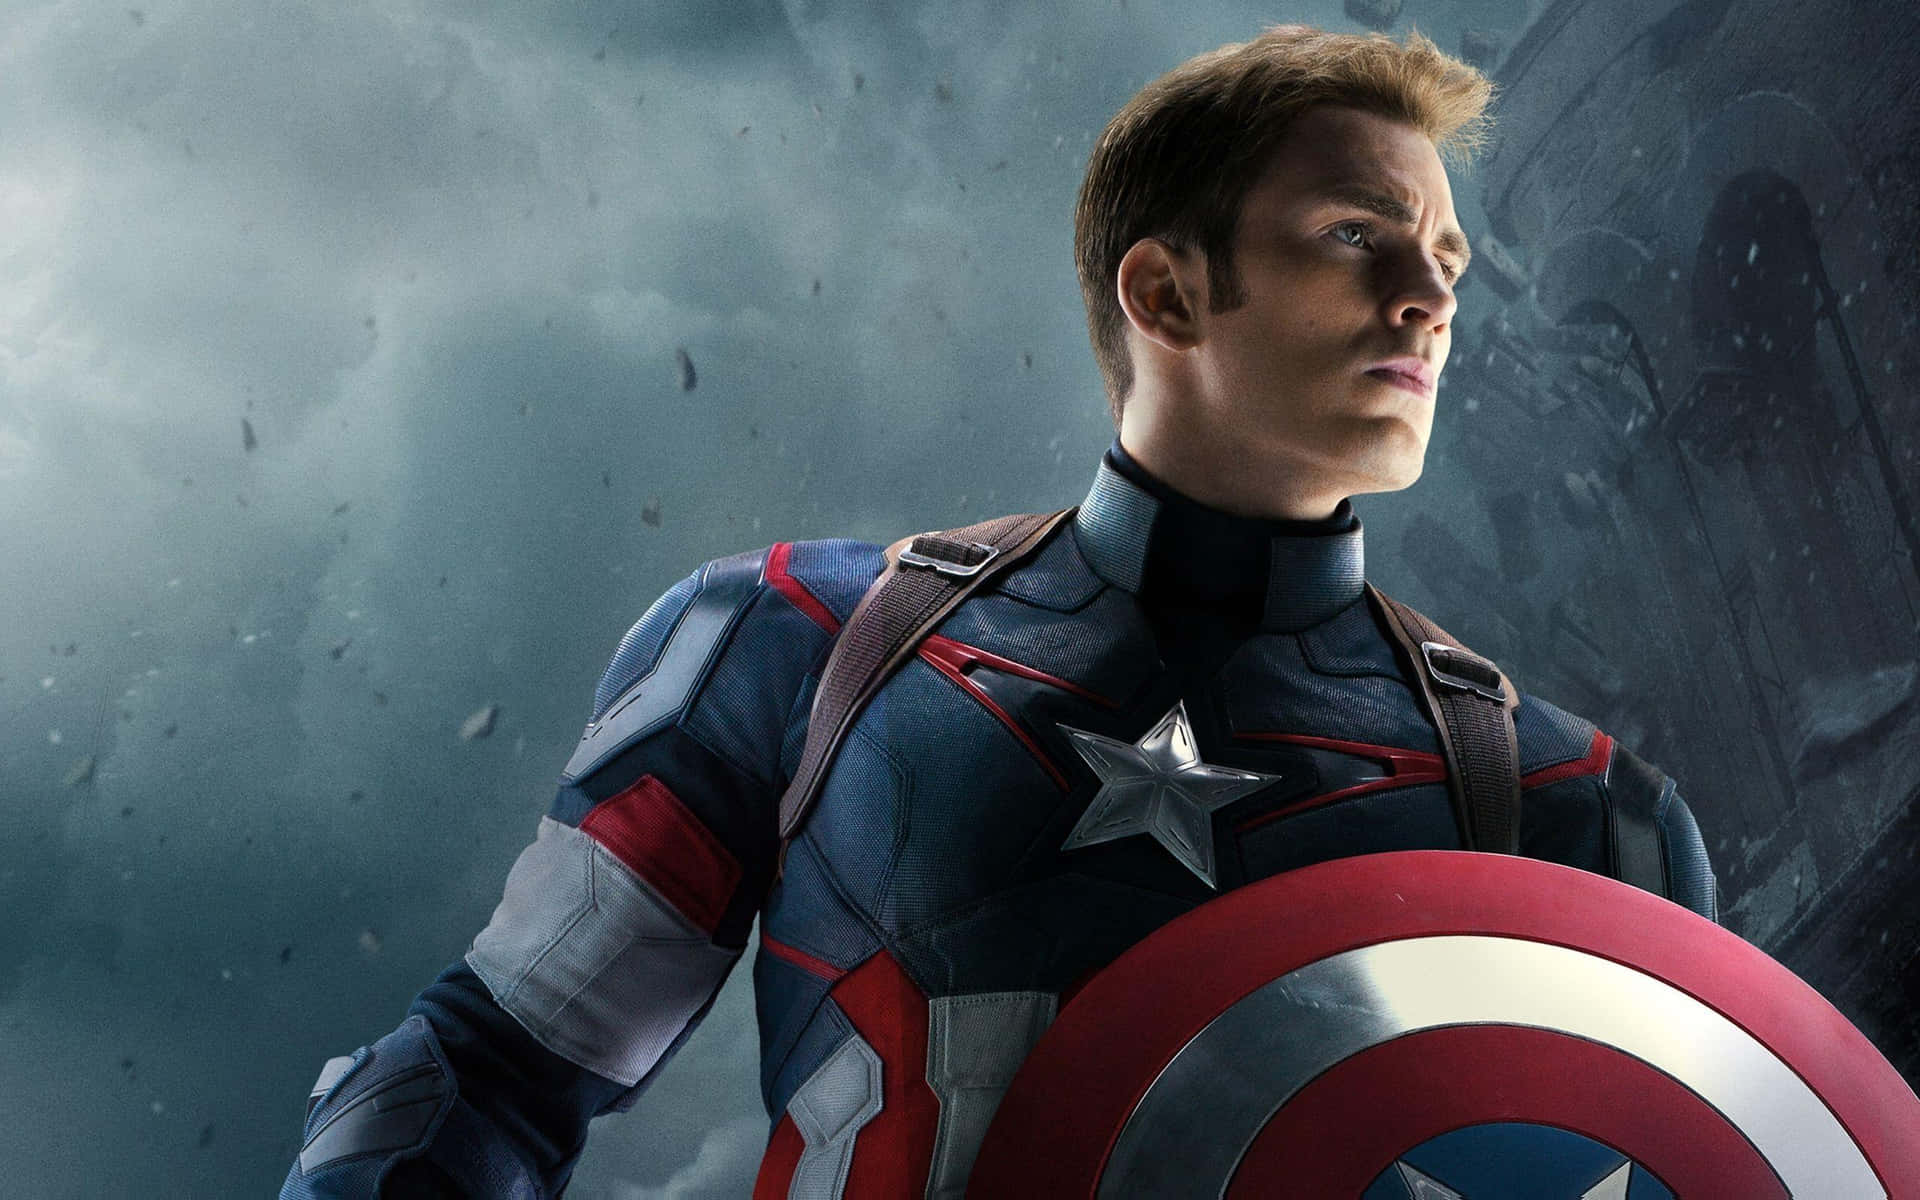 Step into a world of action with the powerful Captain America! Wallpaper